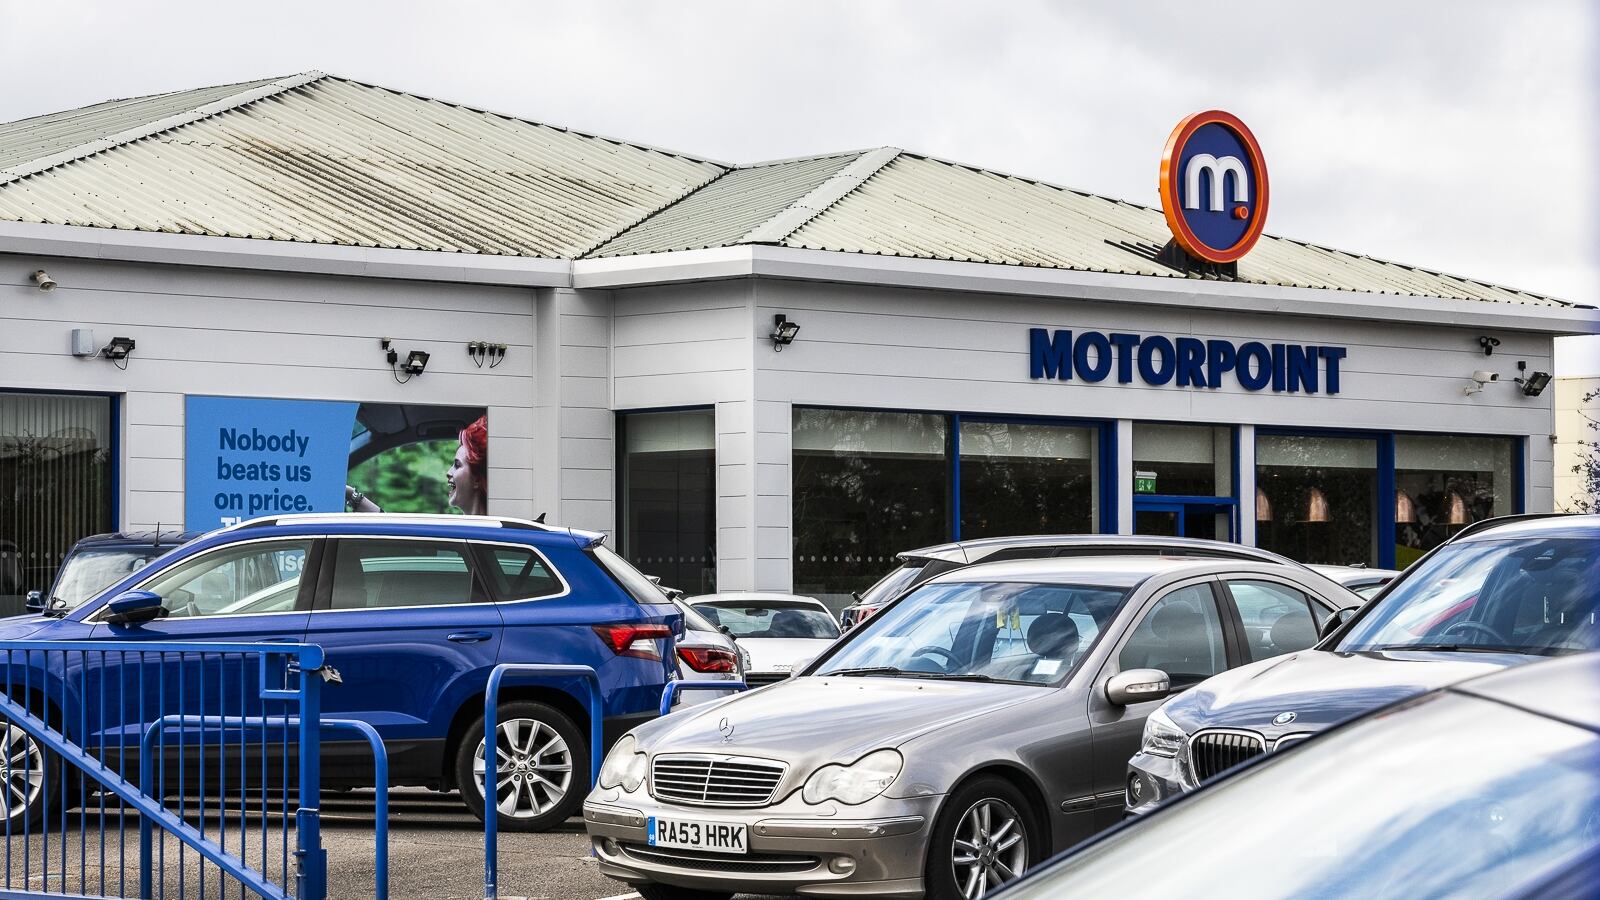 Motorpoint’s boss said it had been the ‘most difficult” year in the group’s history as annual losses widened